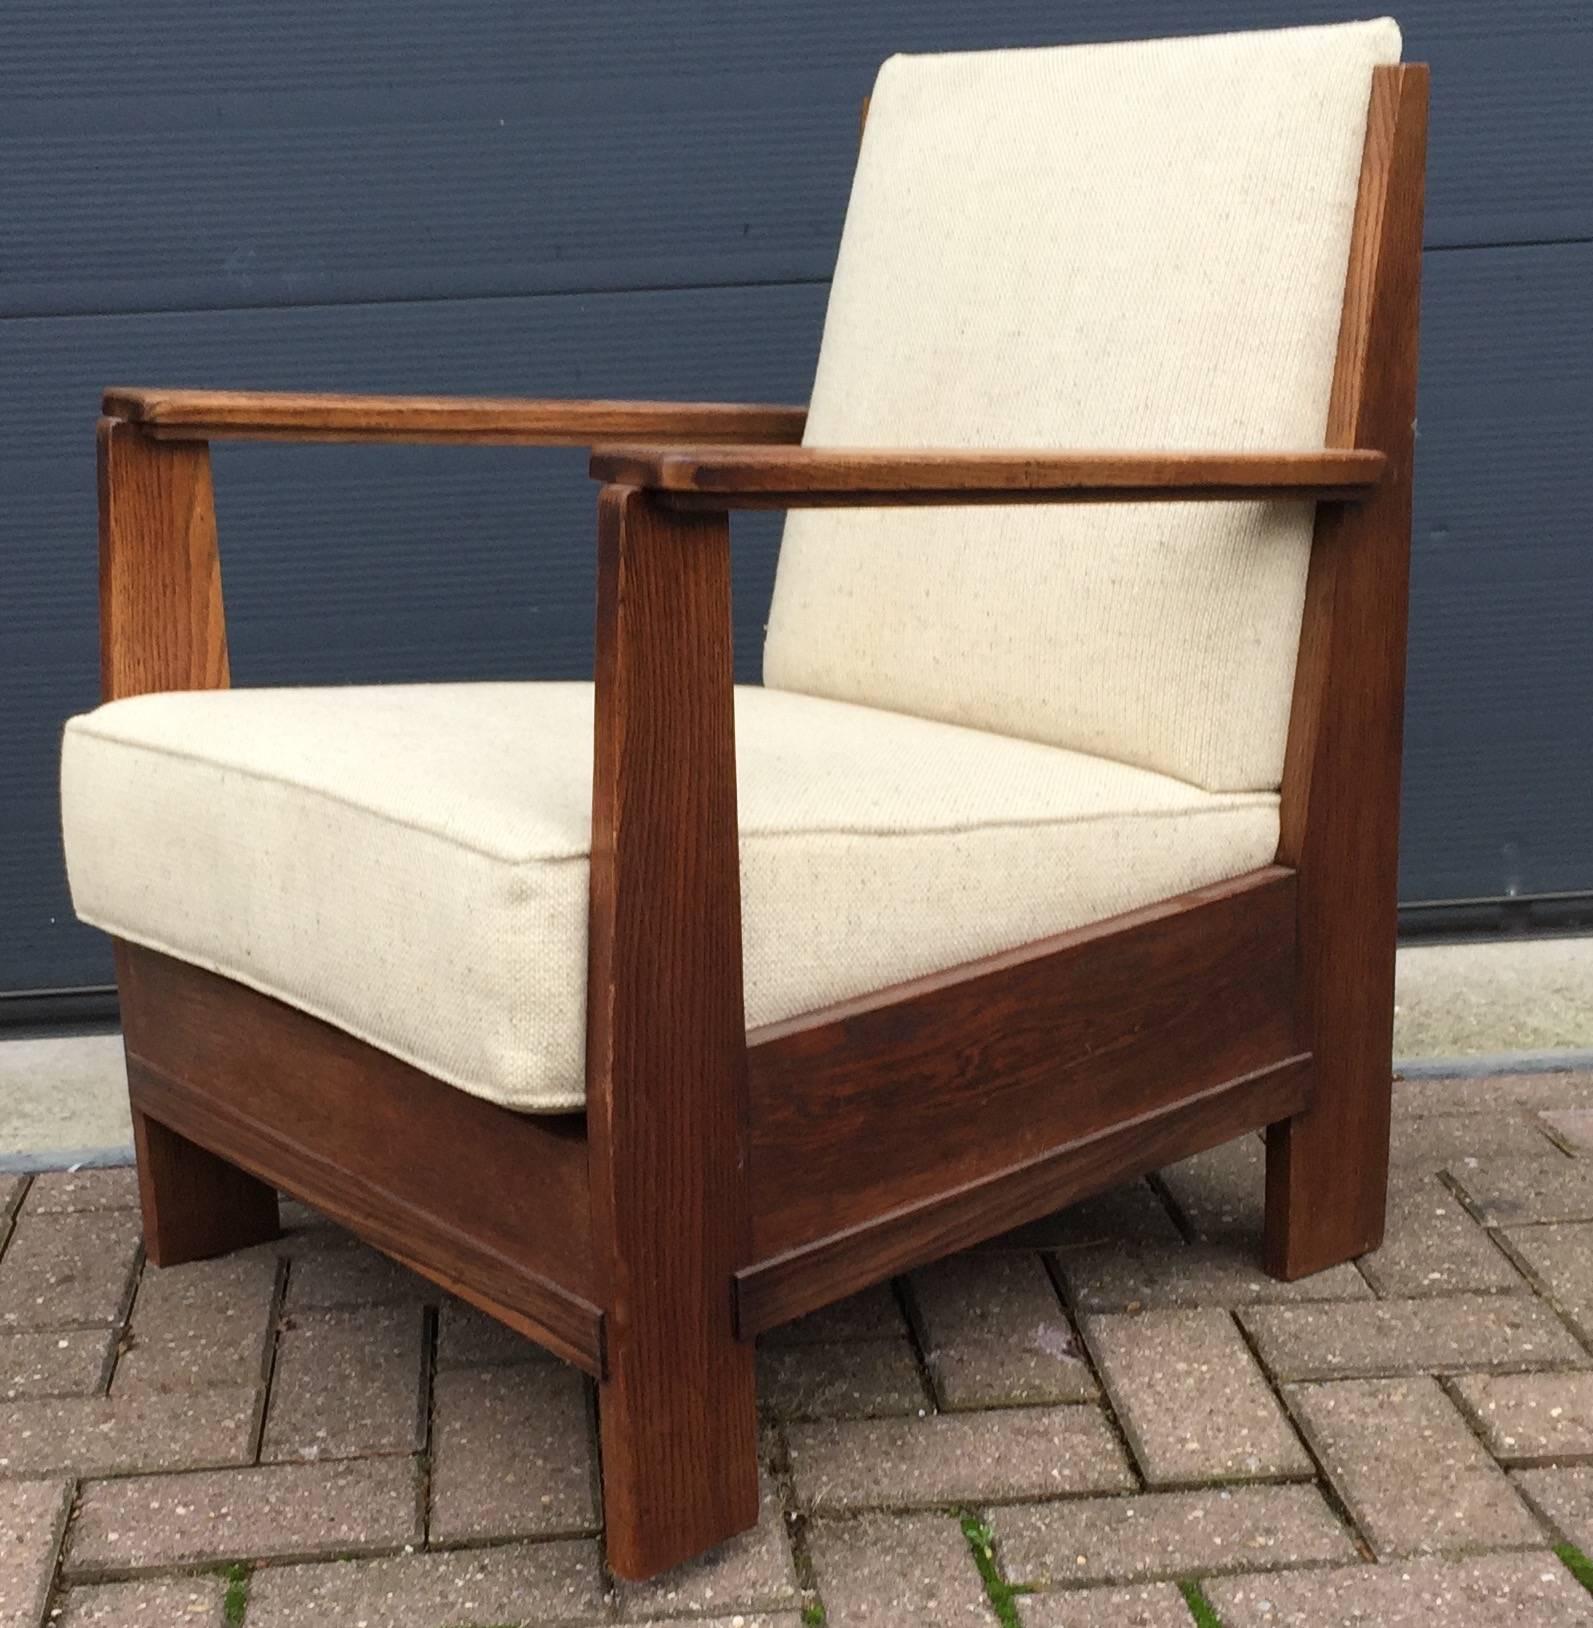 Rare and stylish relax chair from 1920-1925. 

This stunning design lounge chair is made of oak and Macassar ebony. This handcrafted and timeless design comes with the original LOV Oosterbeek nameplate (see image 10) and it is in very good to